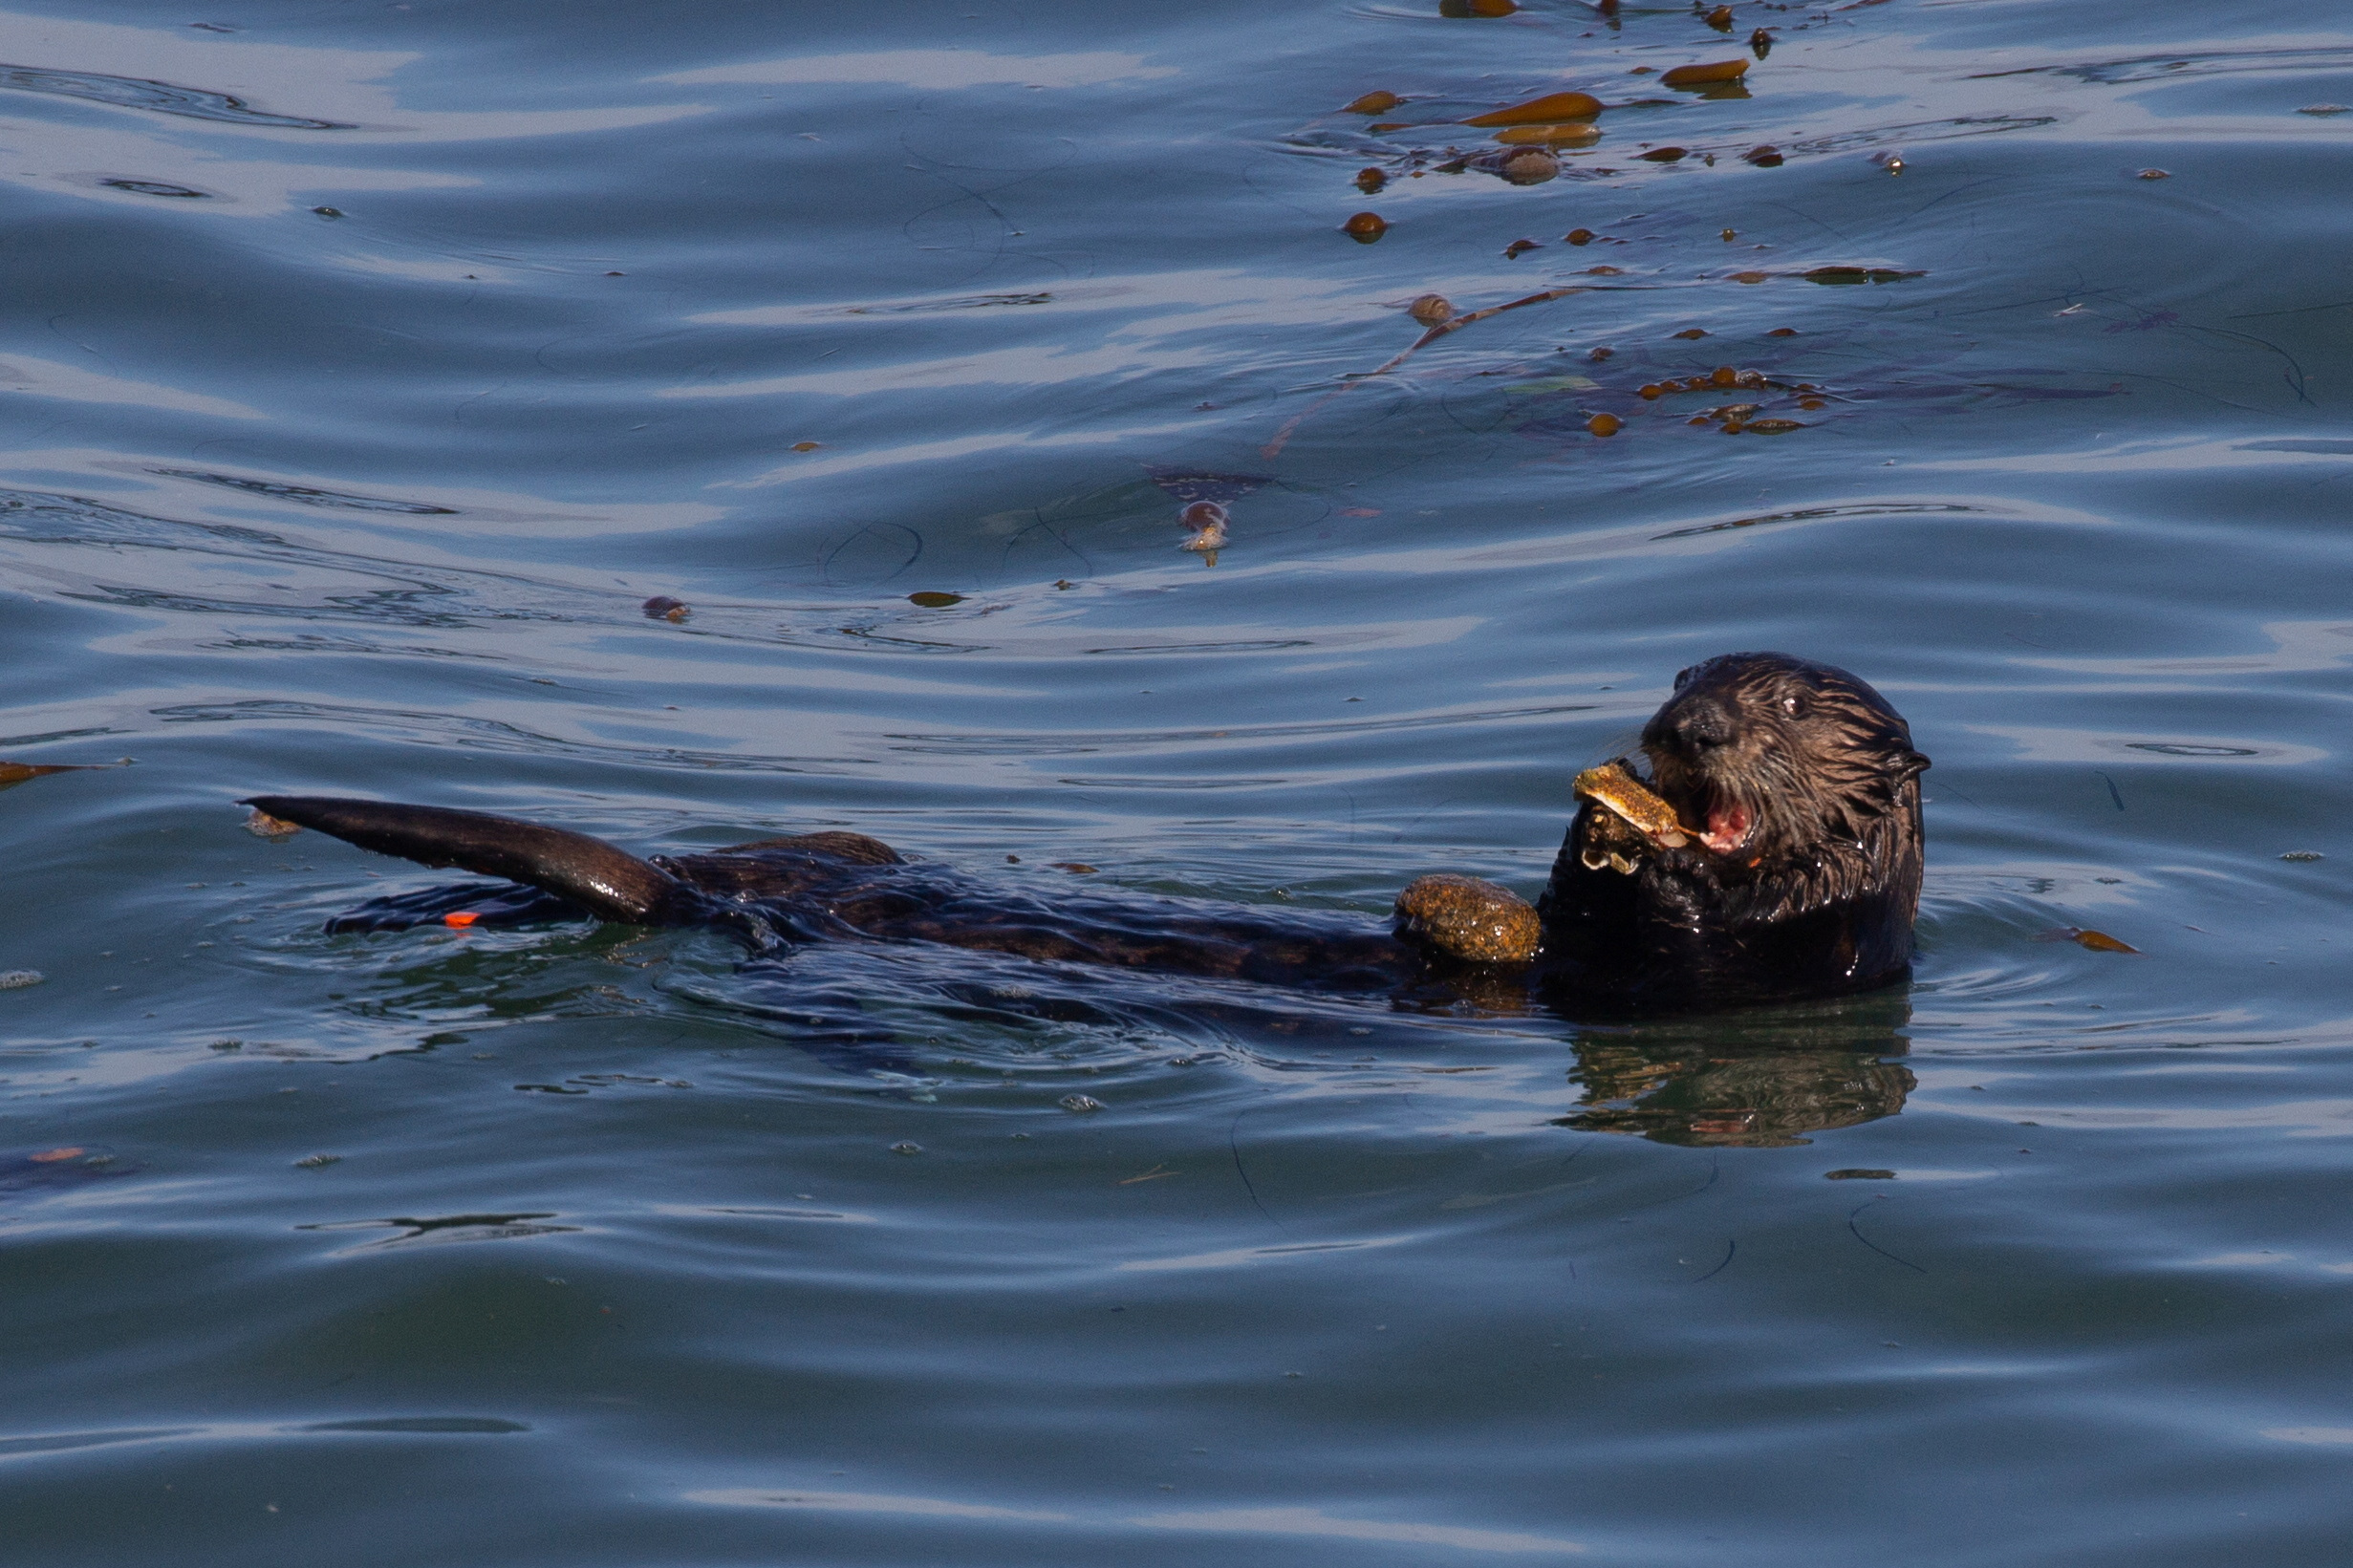 A southern sea otter uses a rock anvil to break open shells of prey, in the Pacific Ocean off the coast of California